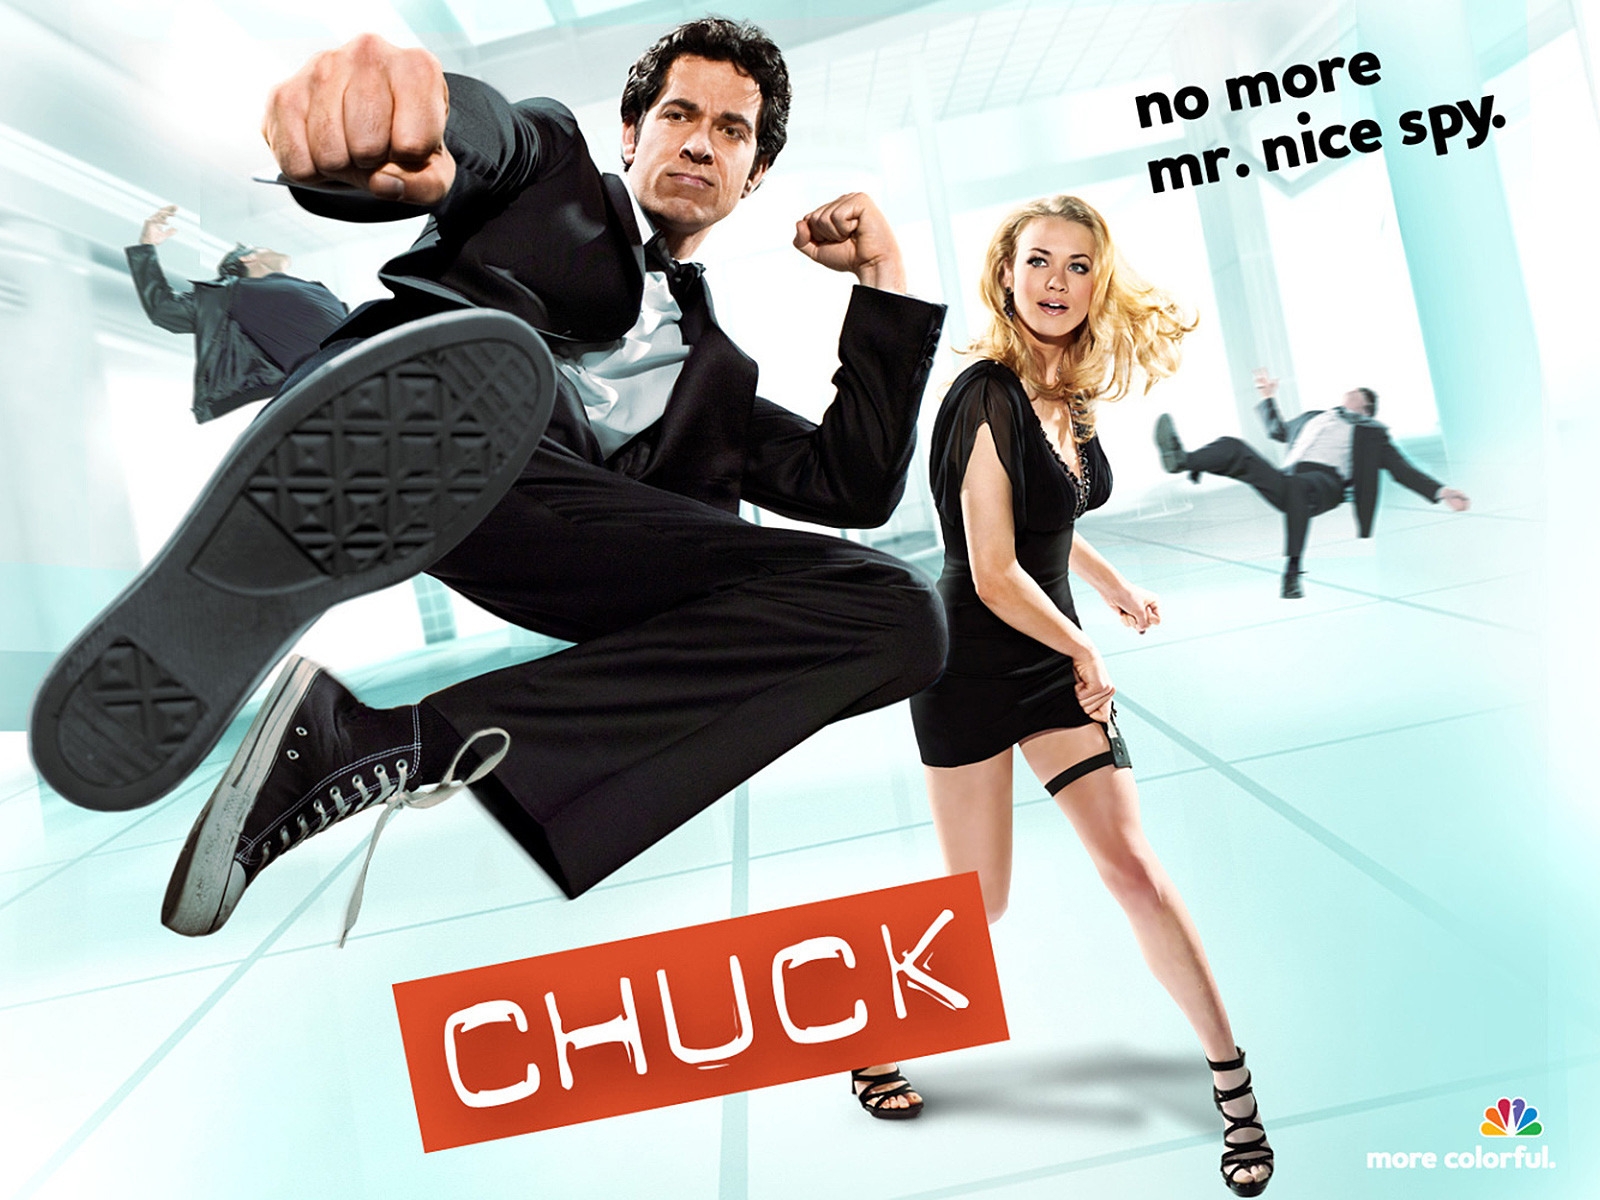 Kung Fu Chuck for 1600 x 1200 resolution